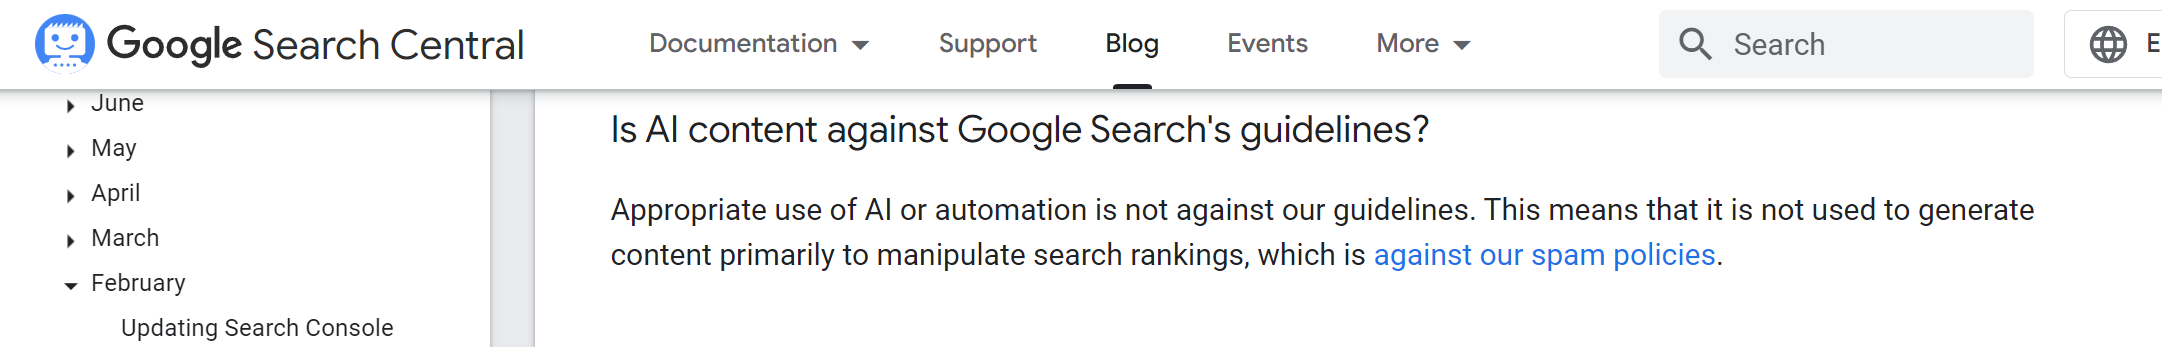 Google Search Central's guidelines answering the question "Is AI content against Google Search's guidelines?" The answer being, "Appropriate use of Ai is not against our guidelines."